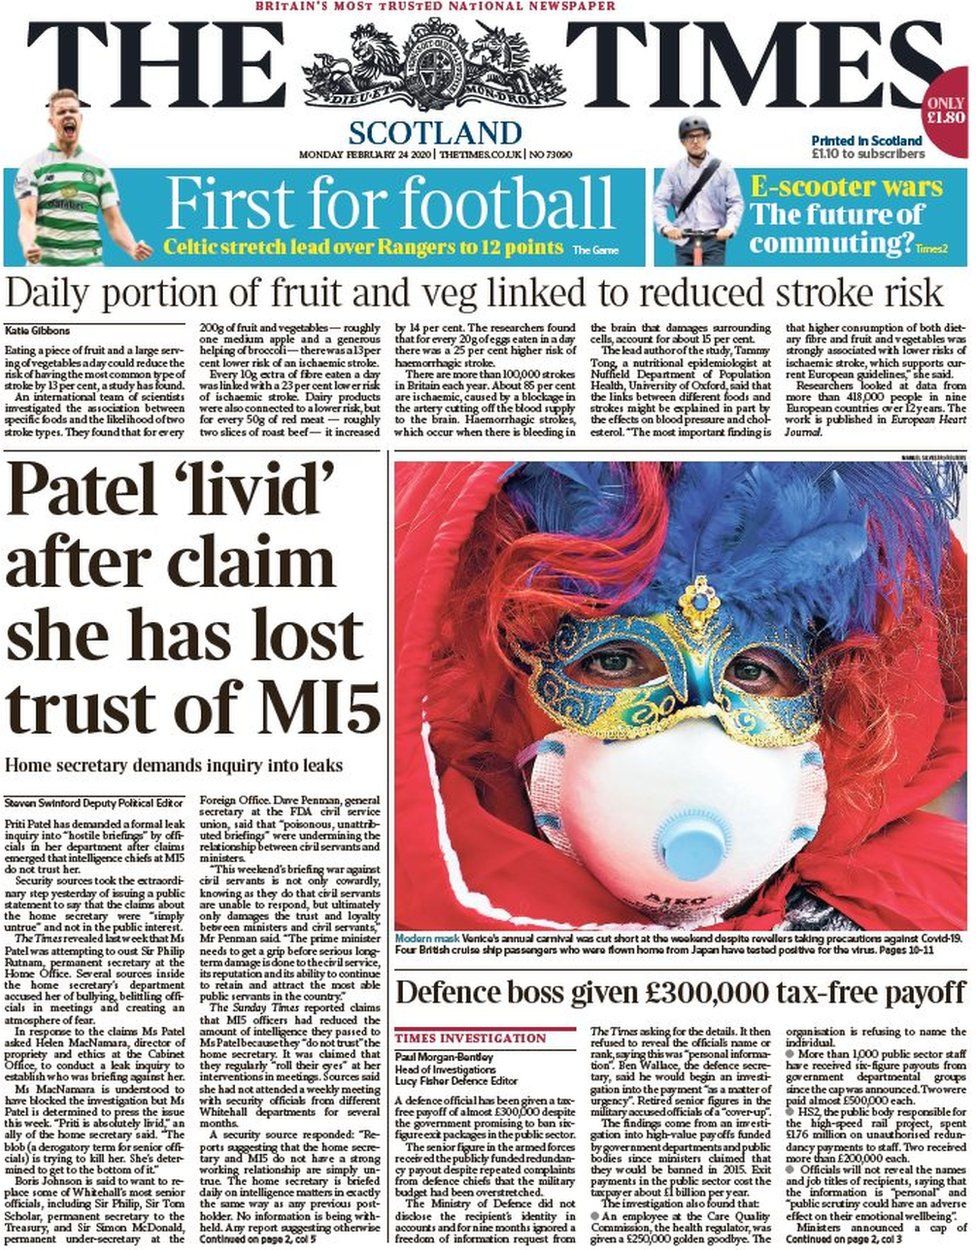 Times front page